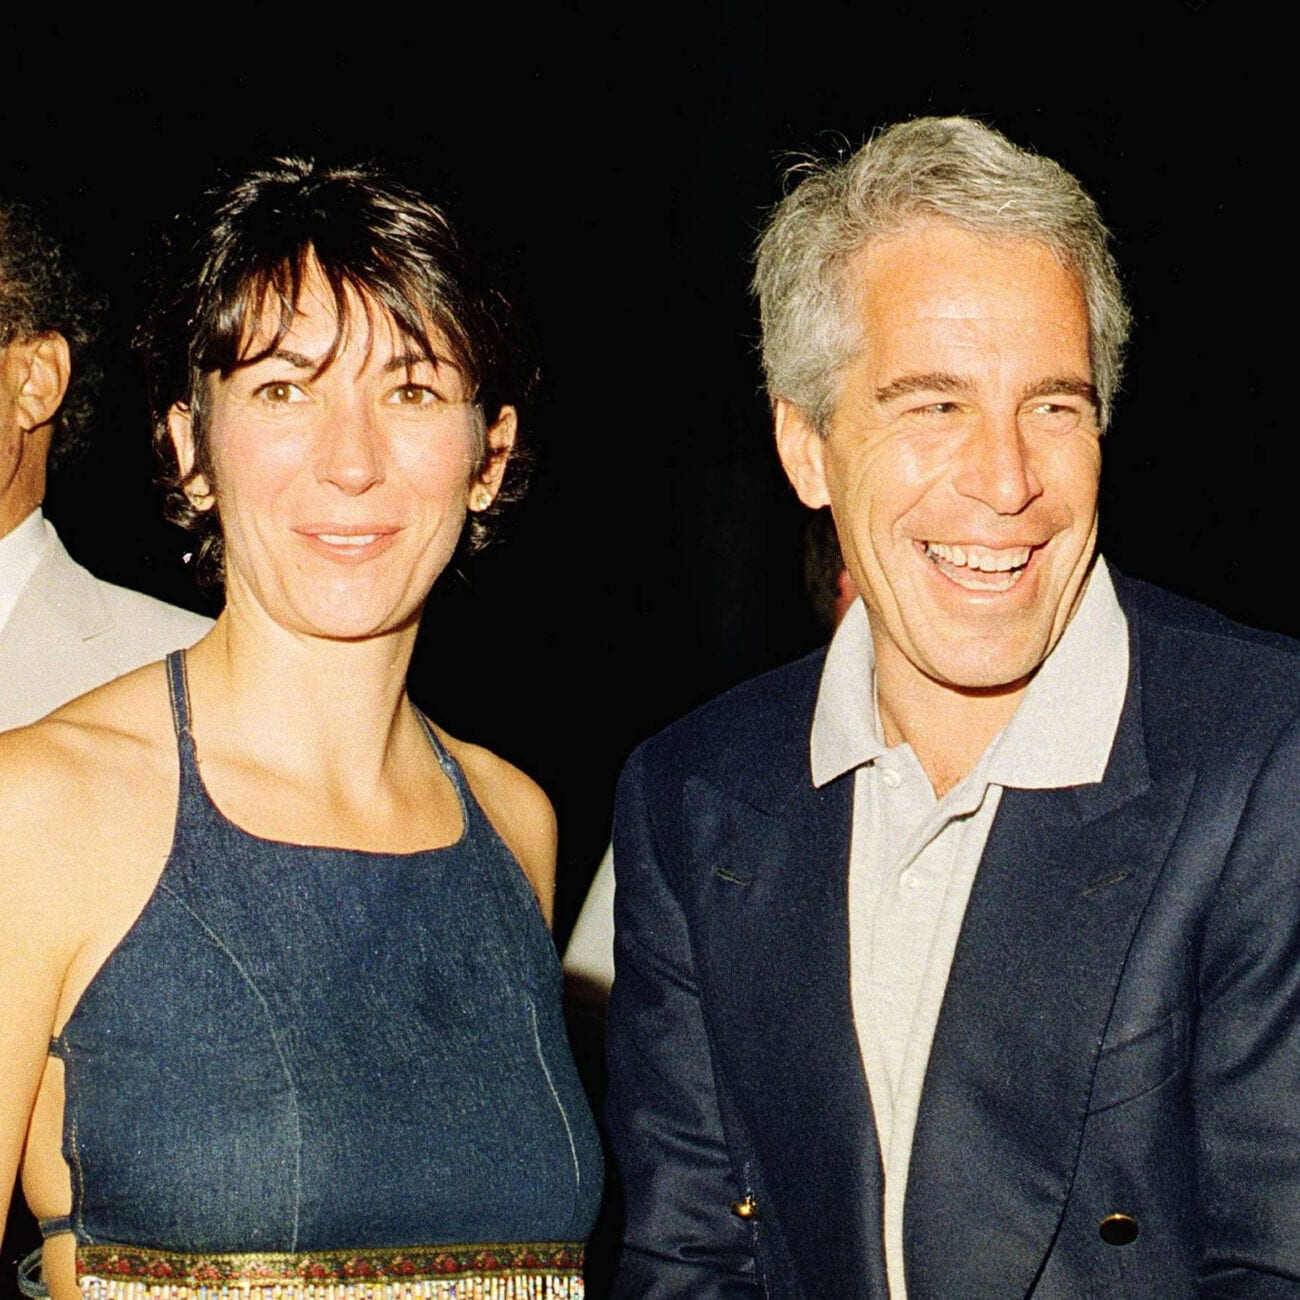 A very short answer: Ghislaine Maxwell was an heiress, inheriting most of h...